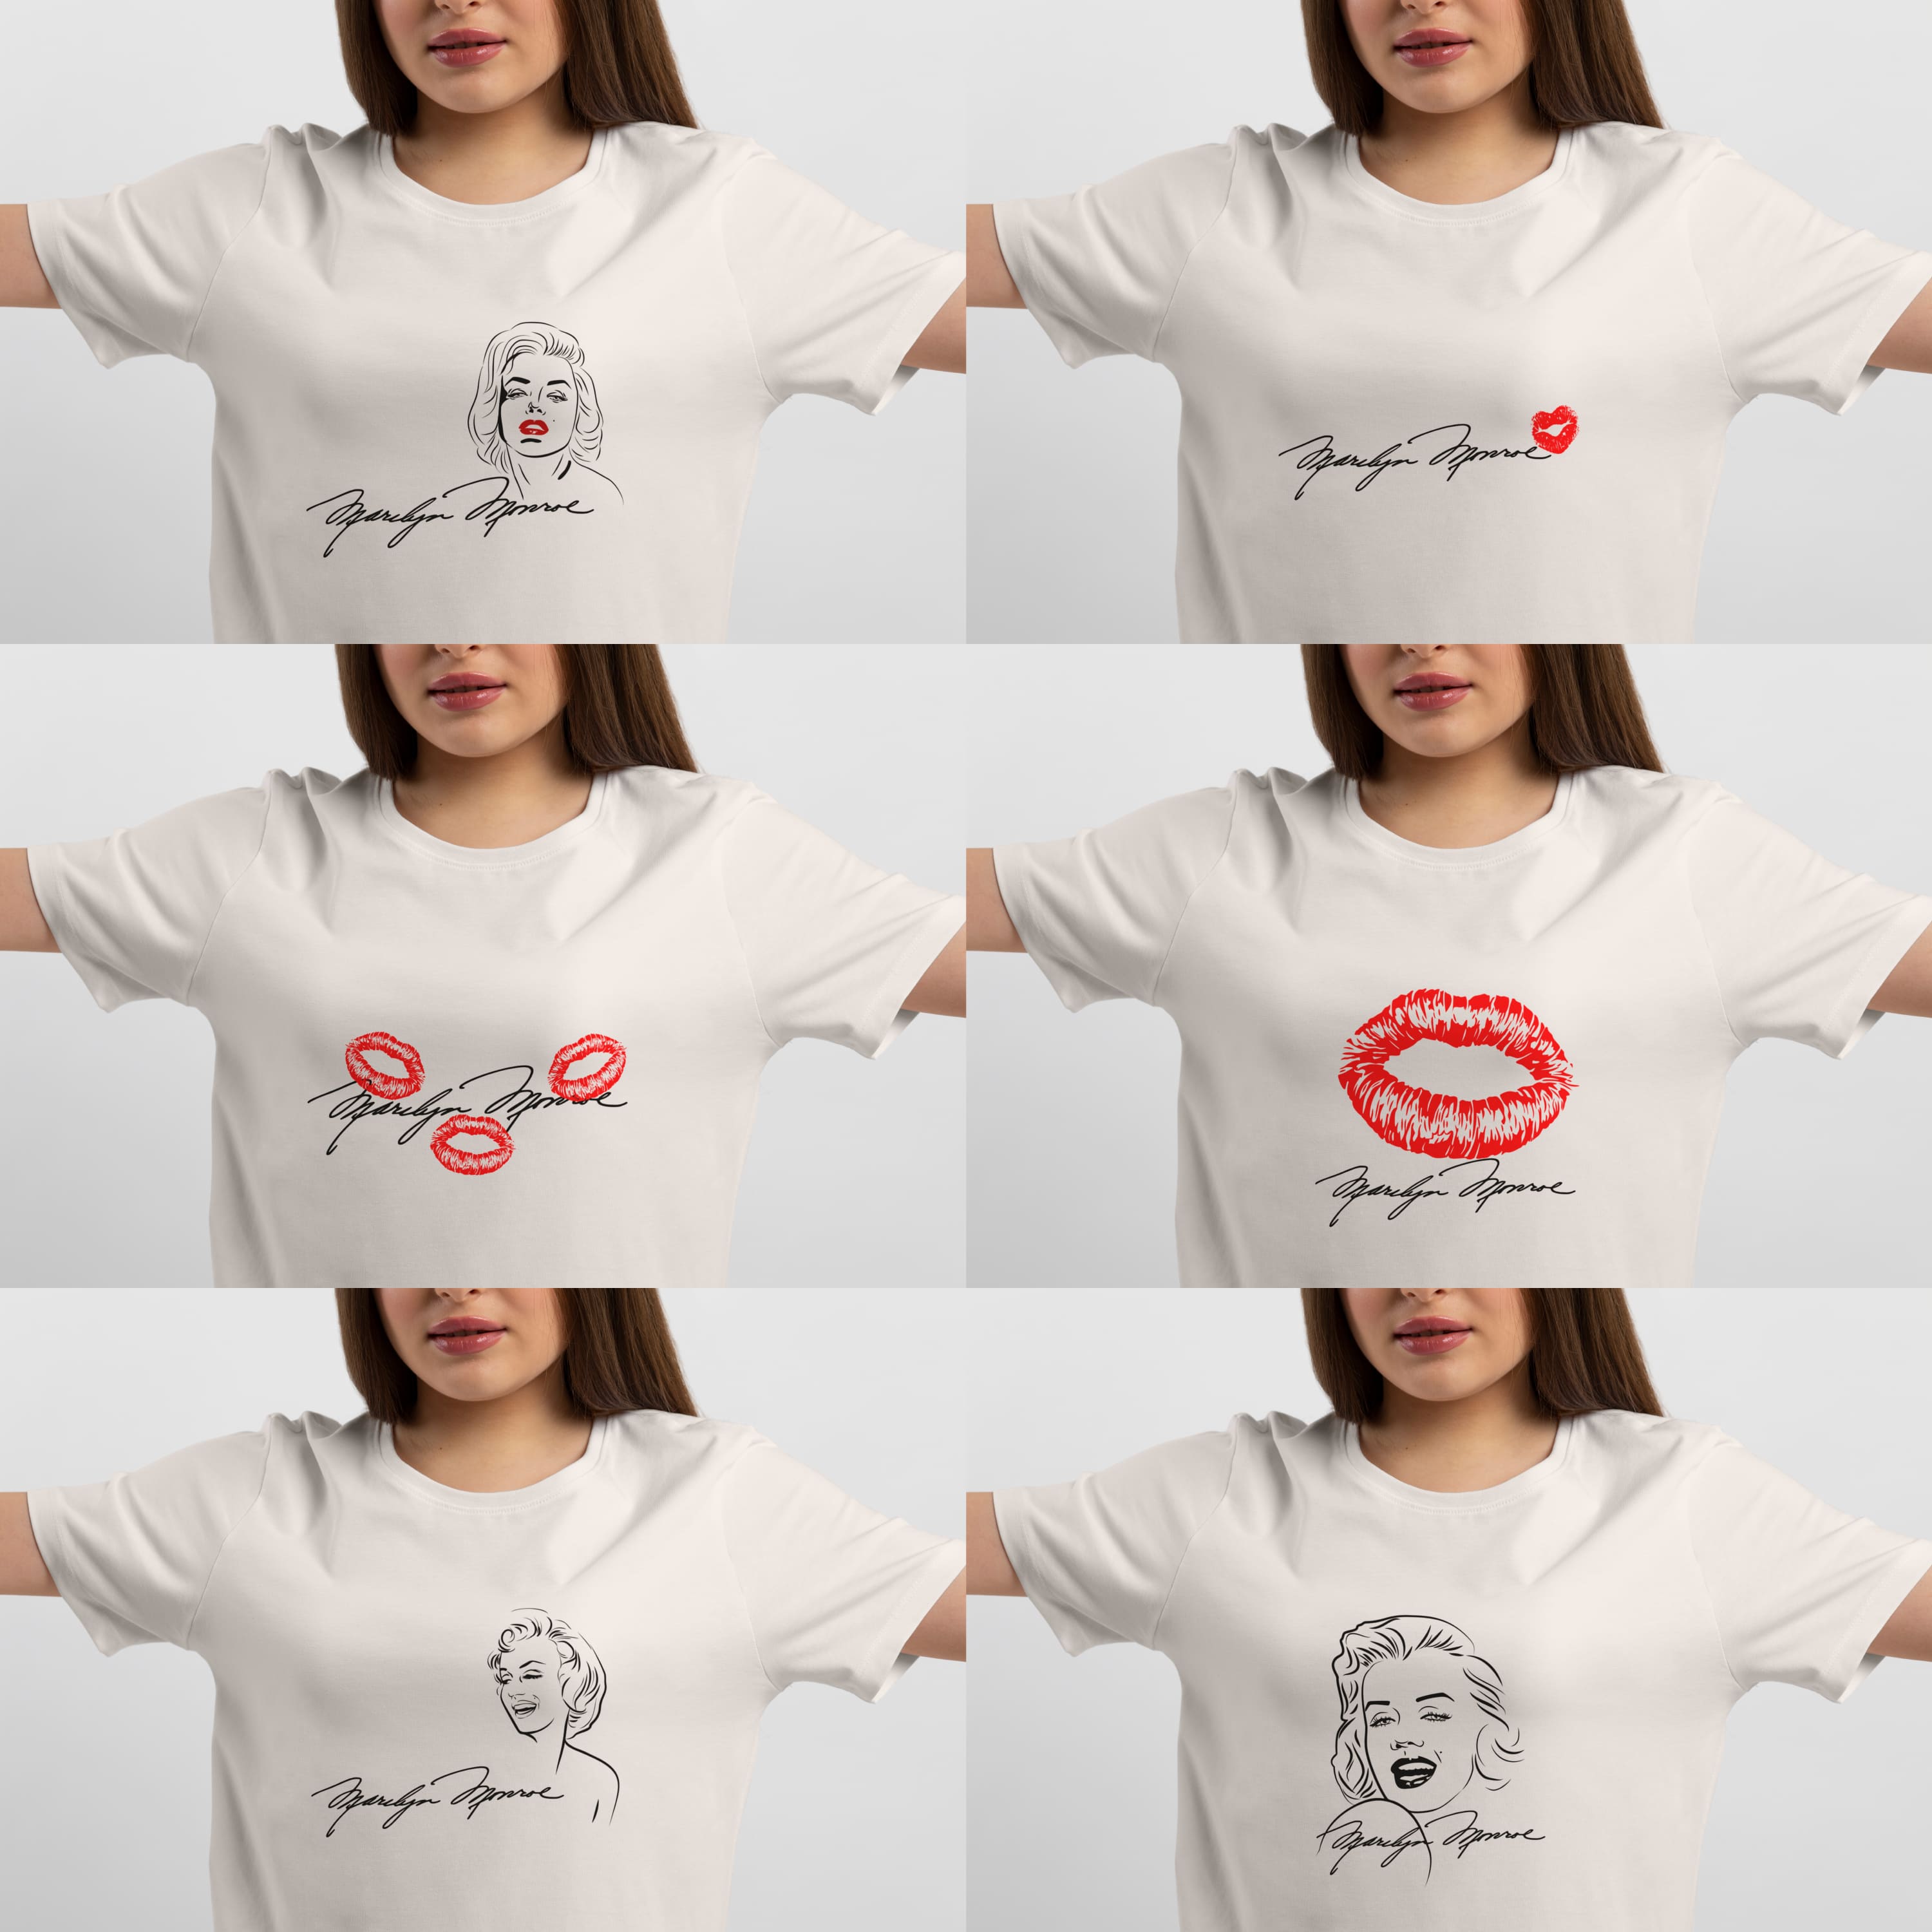 A selection of images of t-shirts with an irresistible print of Marilyn Monroe's signature.